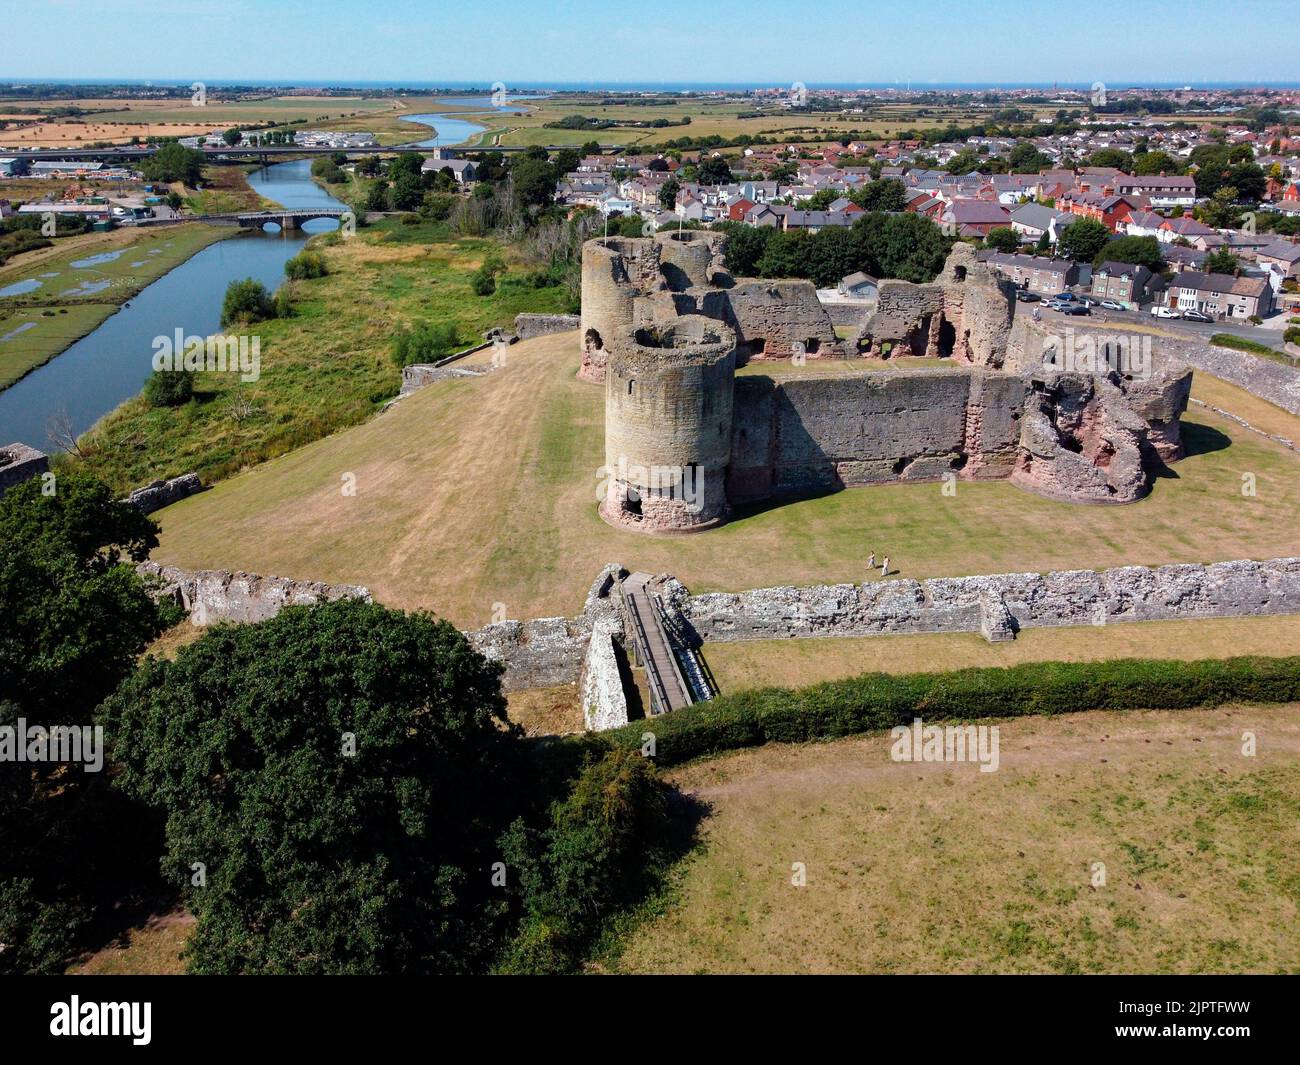 Aerial view of the medieval ruins of Rhuddlan Castle in Denbighshire, North Wales. Dates fron 1277. Stock Photo